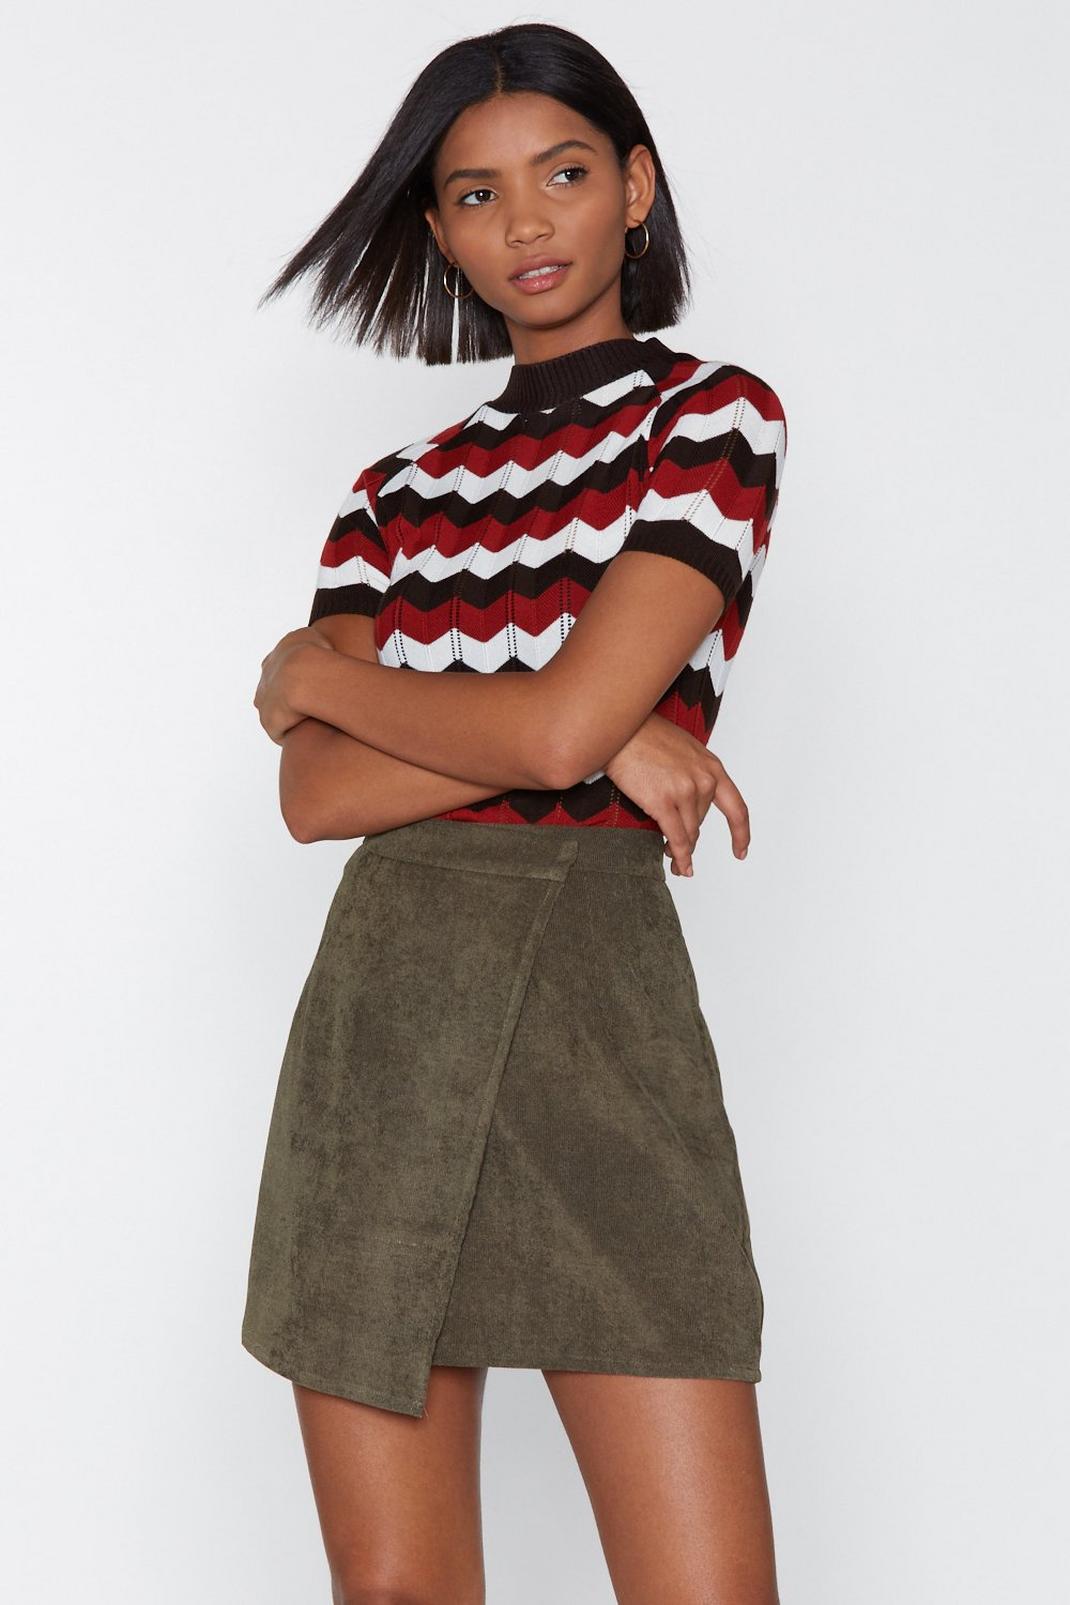 Gimme a Wrap Dance Corduroy Skirt image number 1